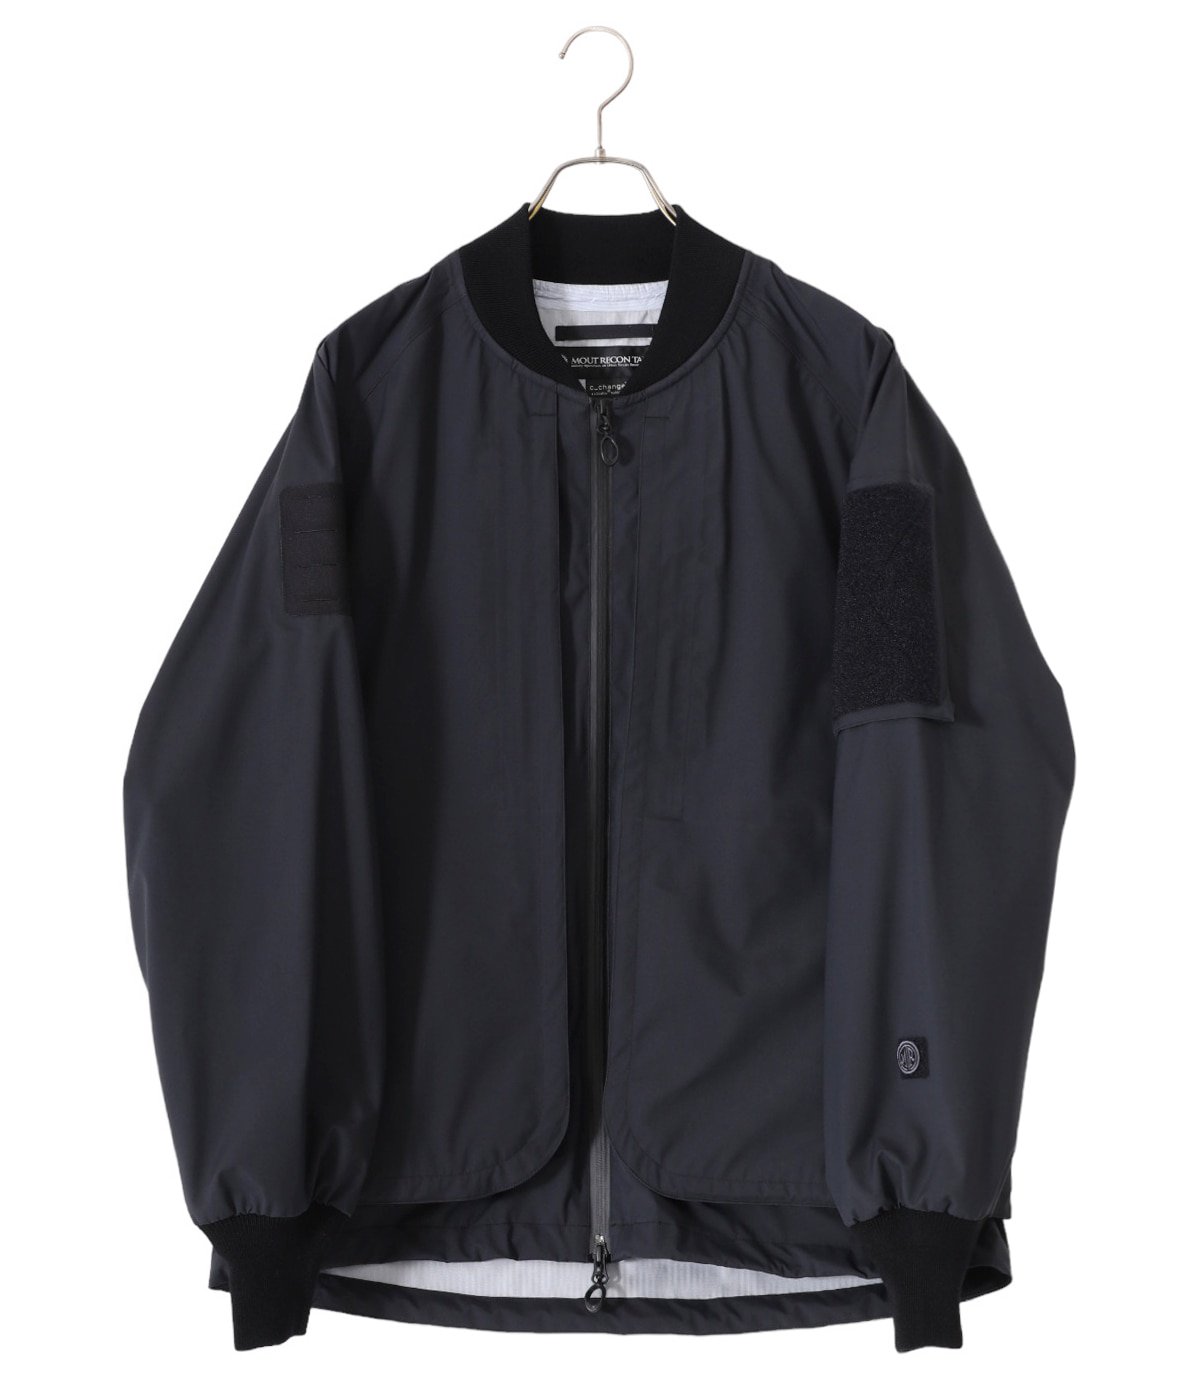 Mout Recon Tailor ジャケット ブルゾン-